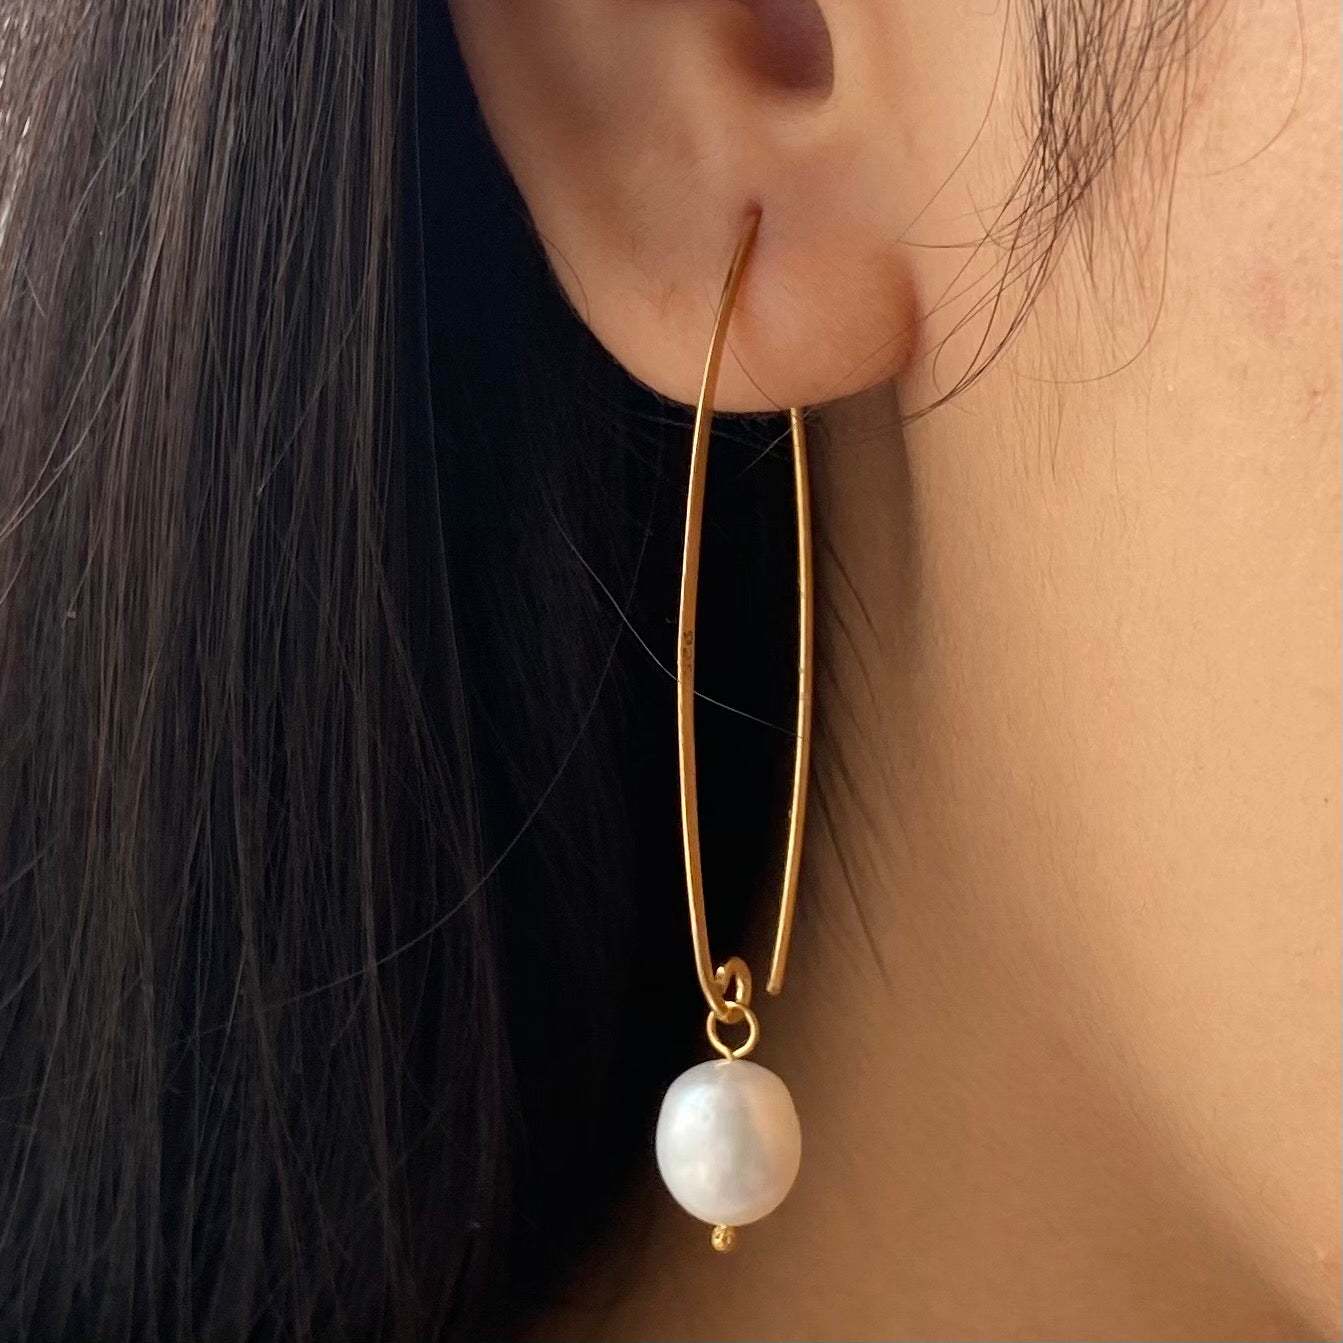 Gold Plated Long Sterling Silver Threader Earrings with White Pearl Drop